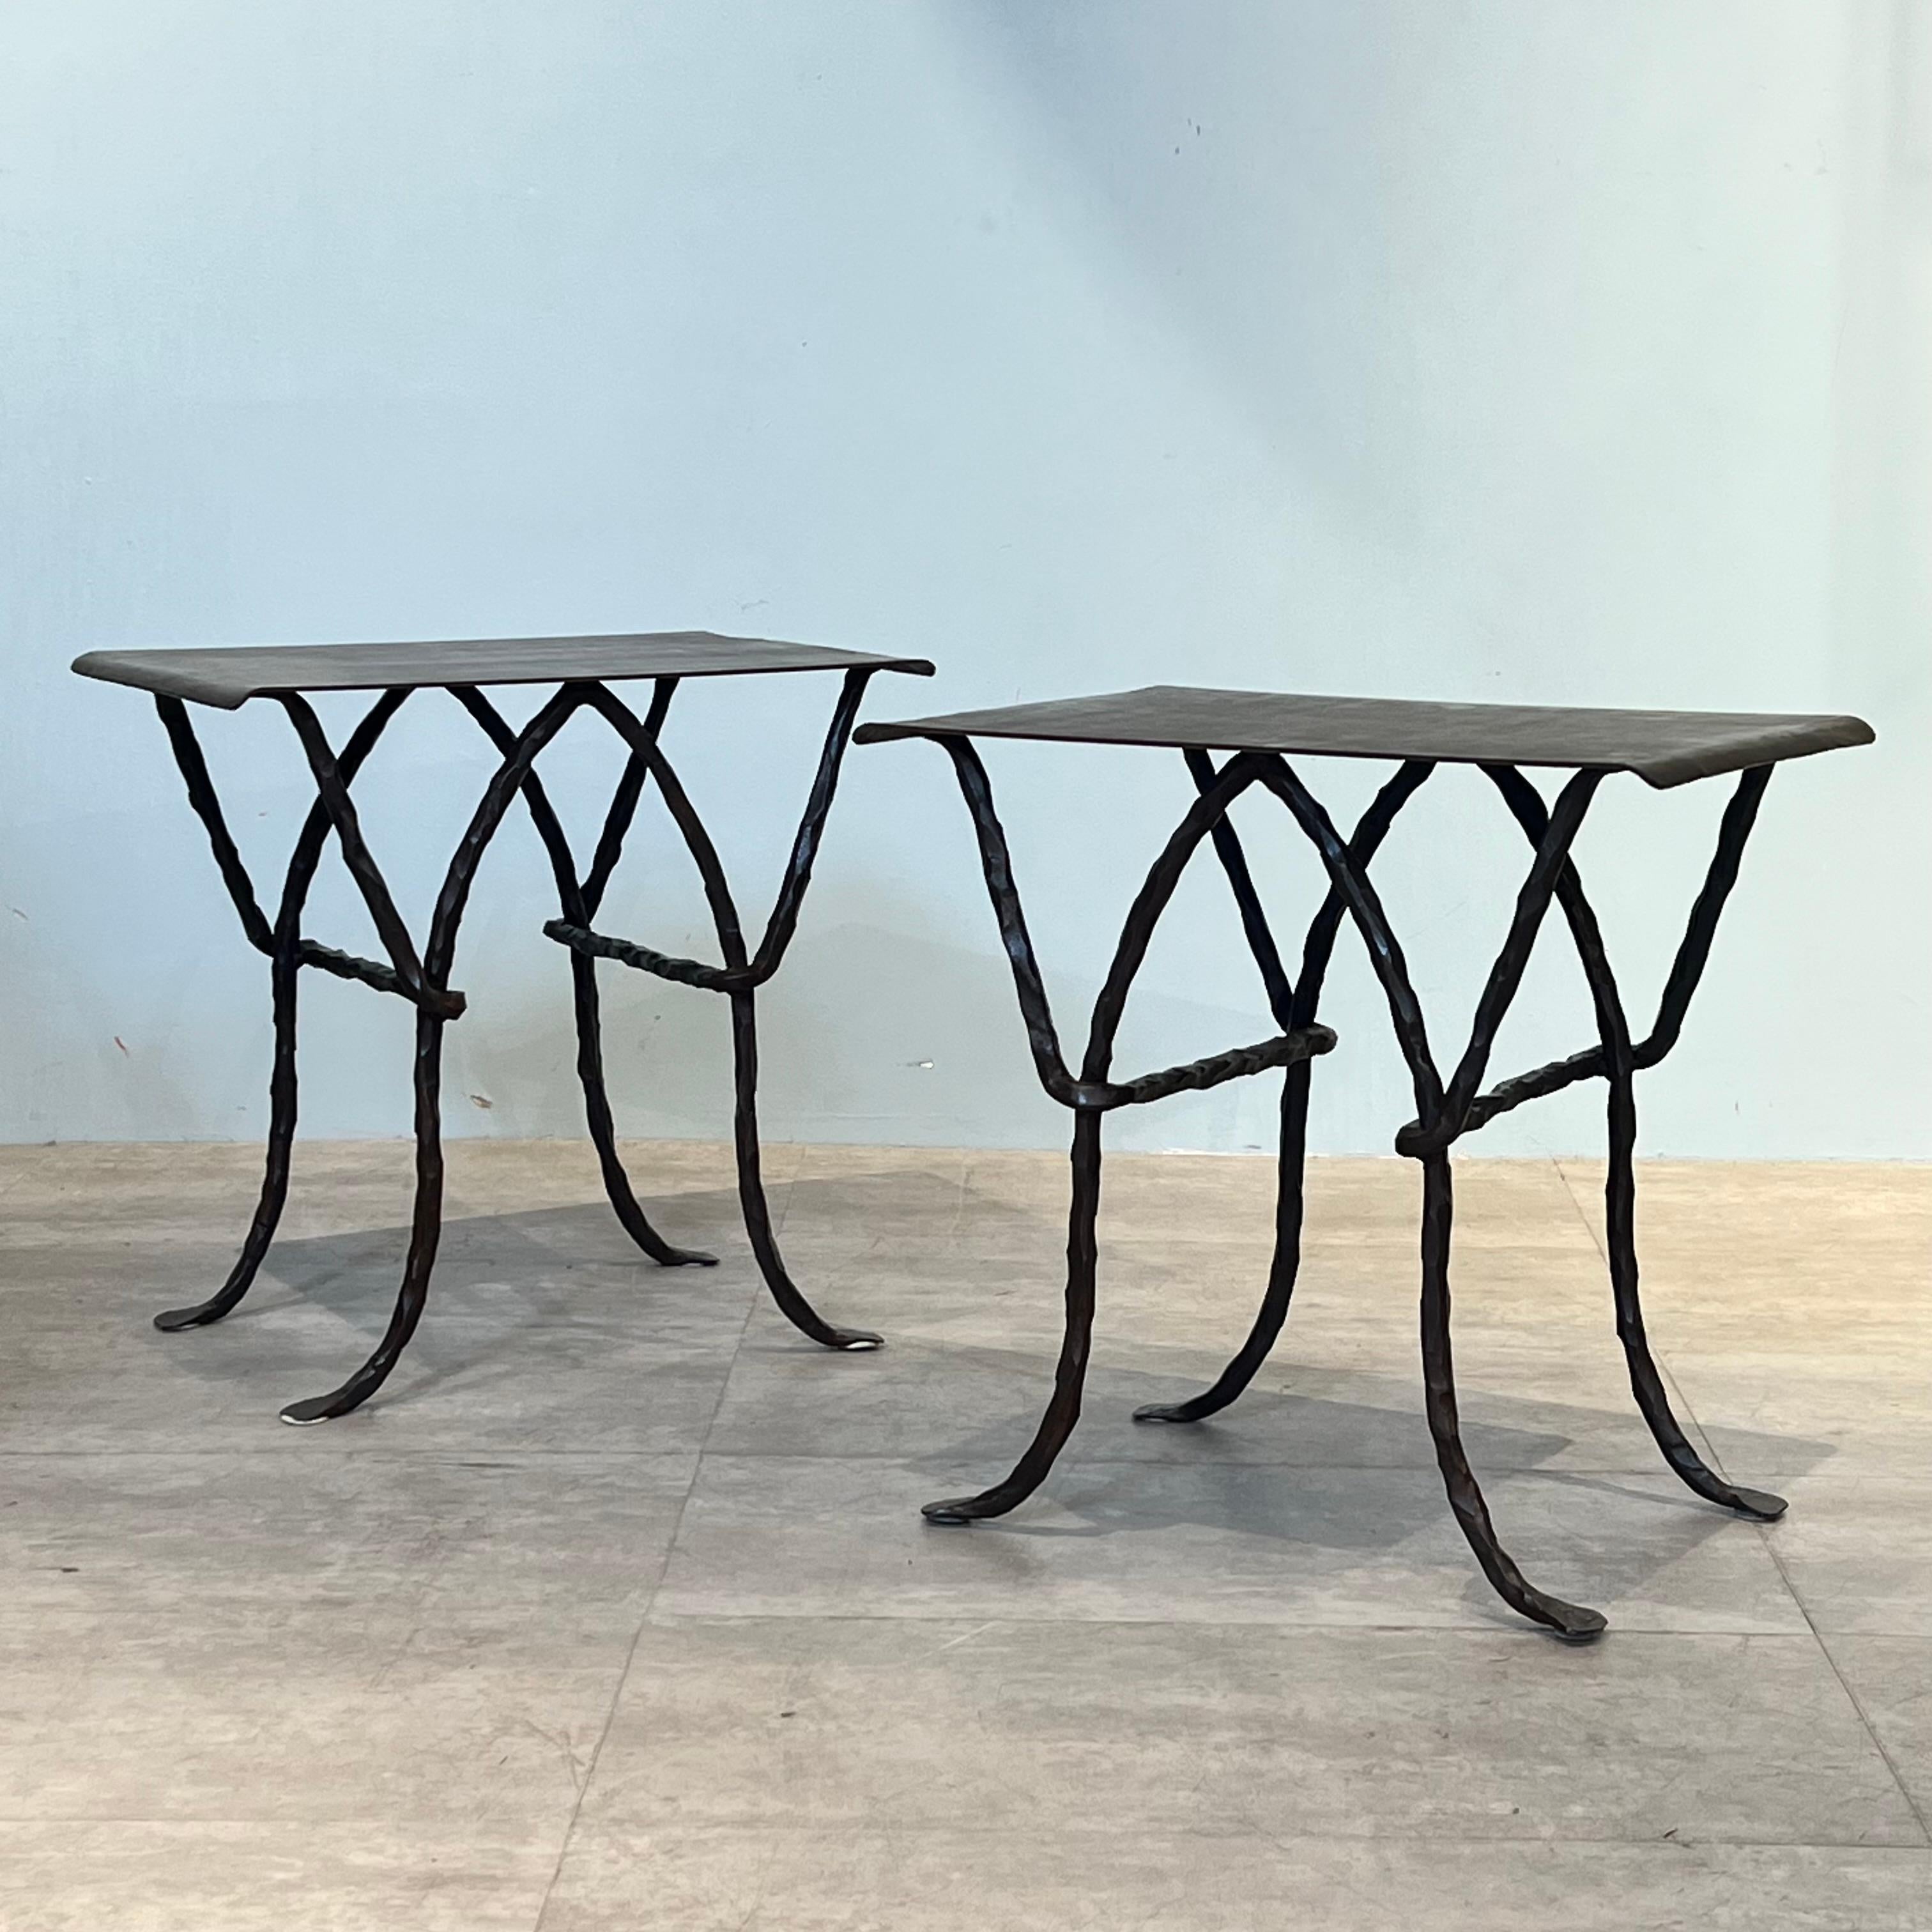 A very unique pair of side tables by Garouste and Bonetti

Signed and numbered 1/2 and 2/2 

Bronze and very low edition 

Very elegant and collectible design from the 1980s

Rare on the market 